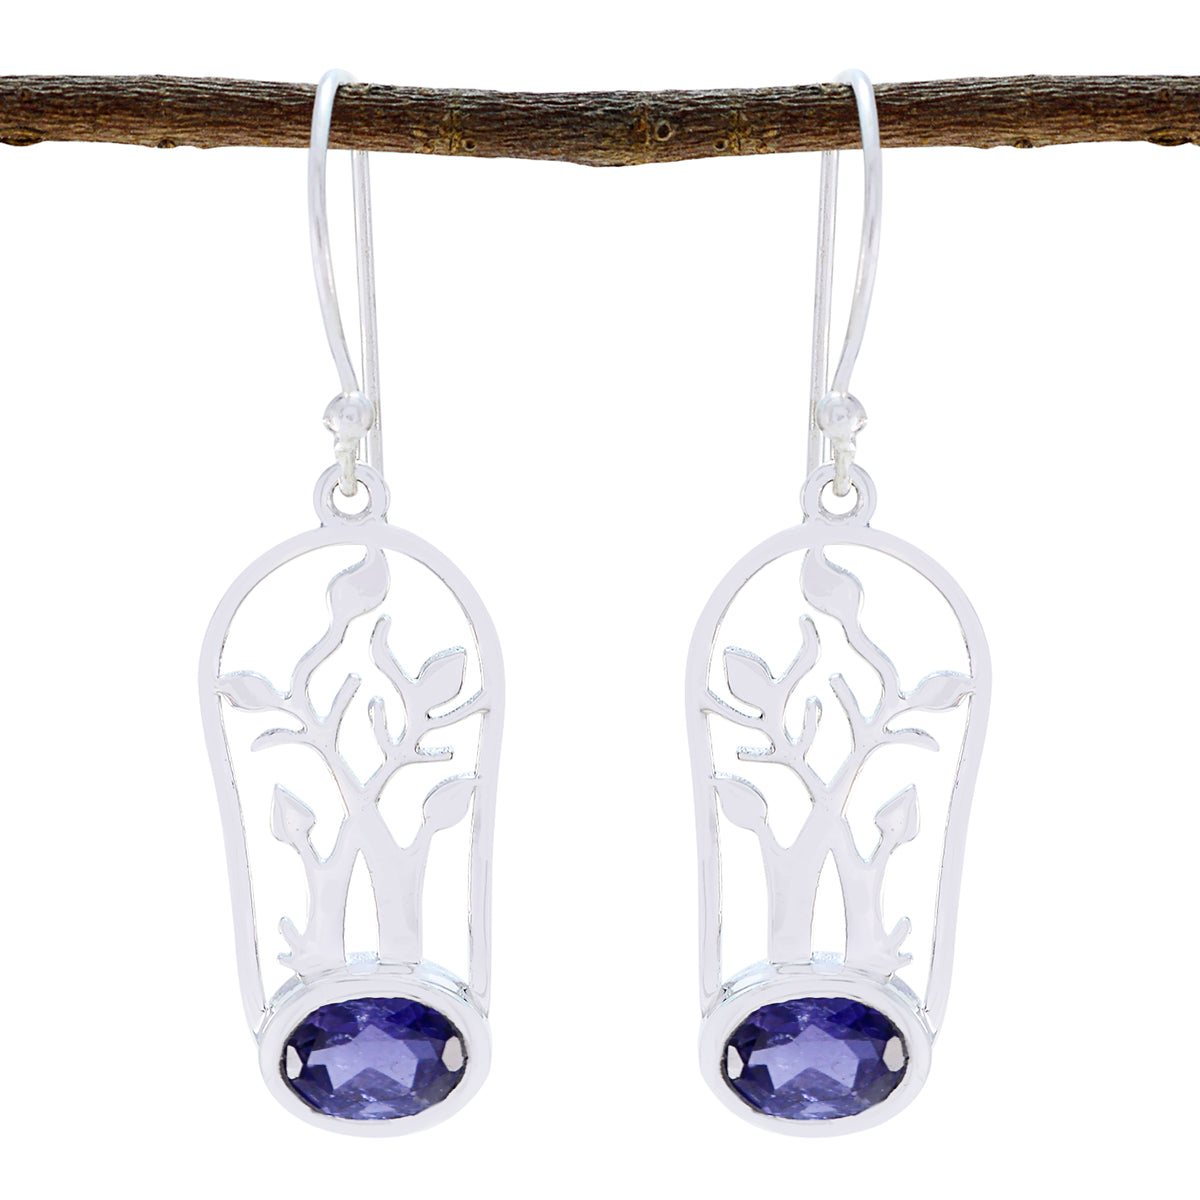 Riyo Real Gemstones oval Faceted Nevy Blue Iolite Silver Earrings gift for christmas day